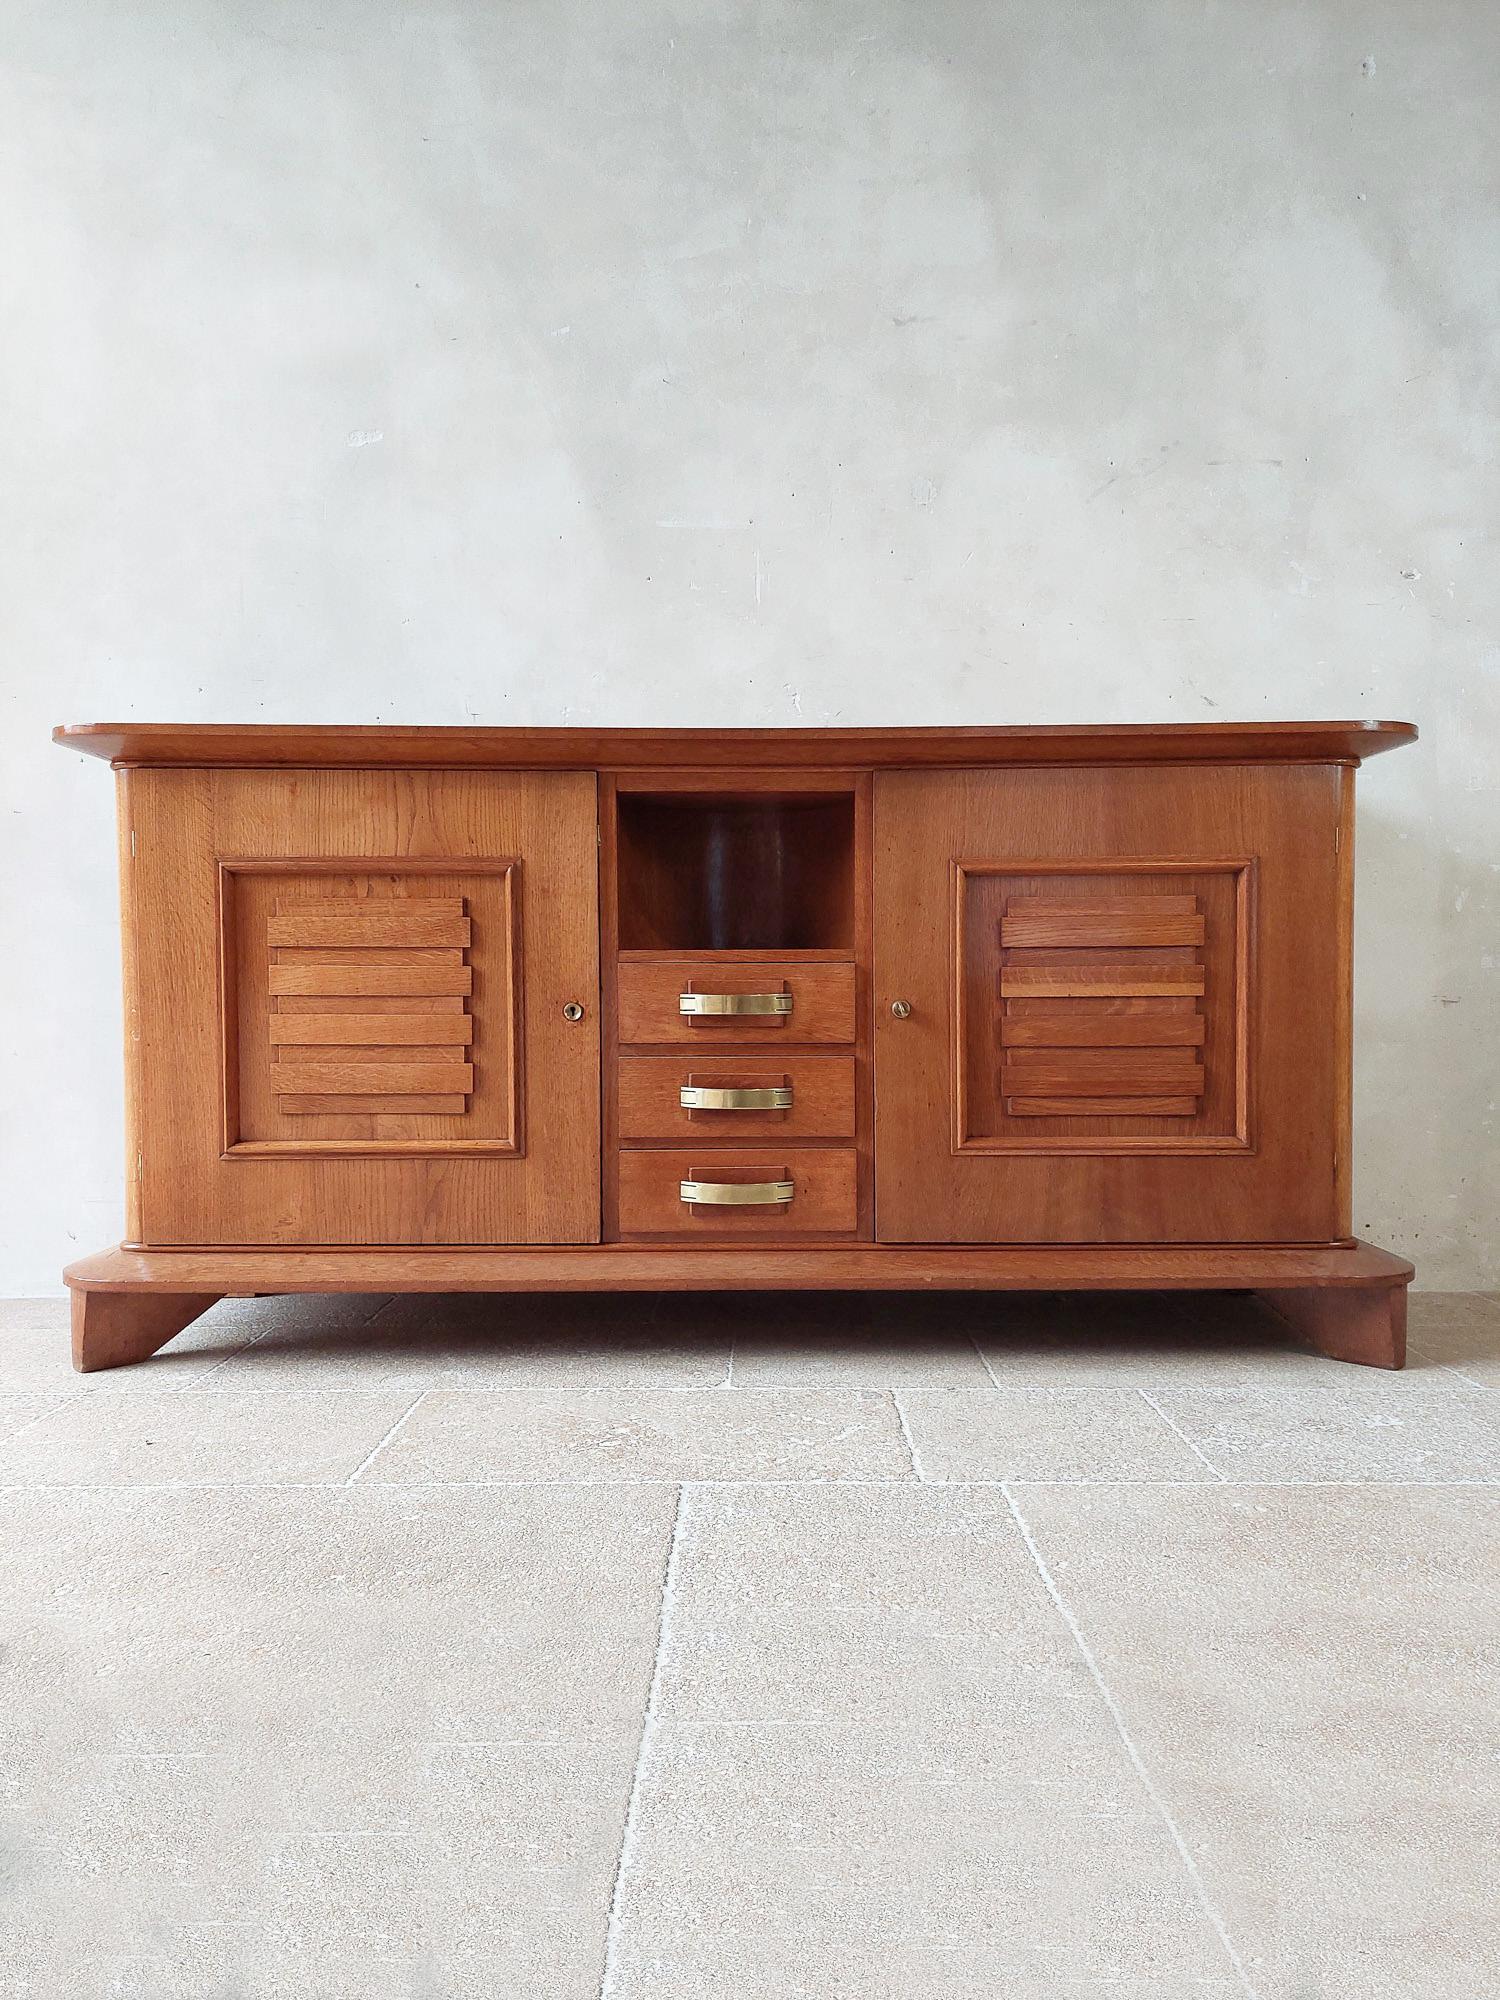 Vintage solid oak Art Deco sideboard by Jean Royere for maison Gouffé Paris, 1940. Two pannelend doors, in the middle 3 drawers with beautiful bronze handles underneath a curved niche.

Measures: H 100,5 x W 215,5 x D 50 cm.